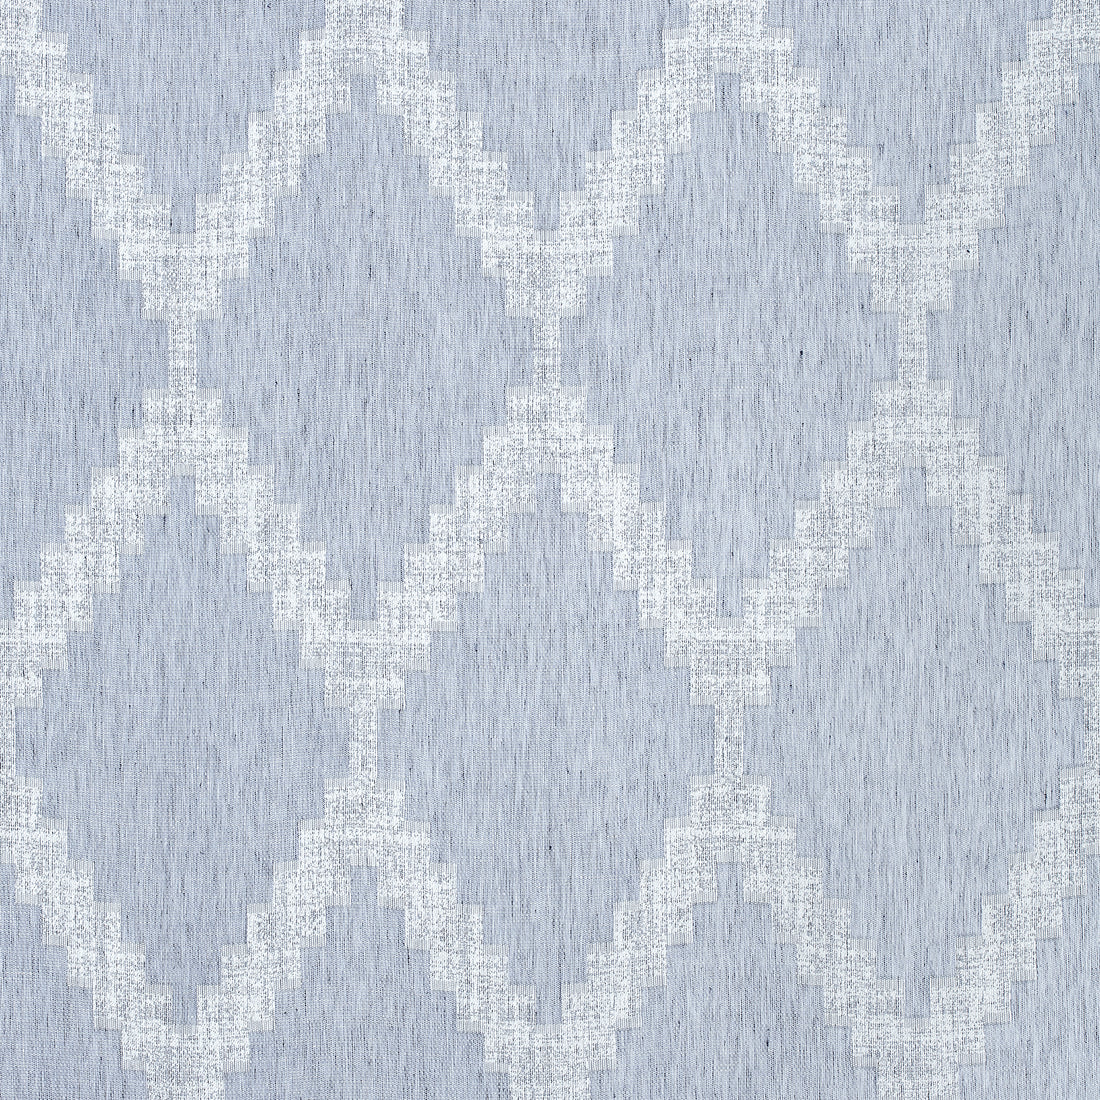 Harlow Sheer fabric in navy color - pattern number FWW7131 - by Thibaut in the Atmosphere collection